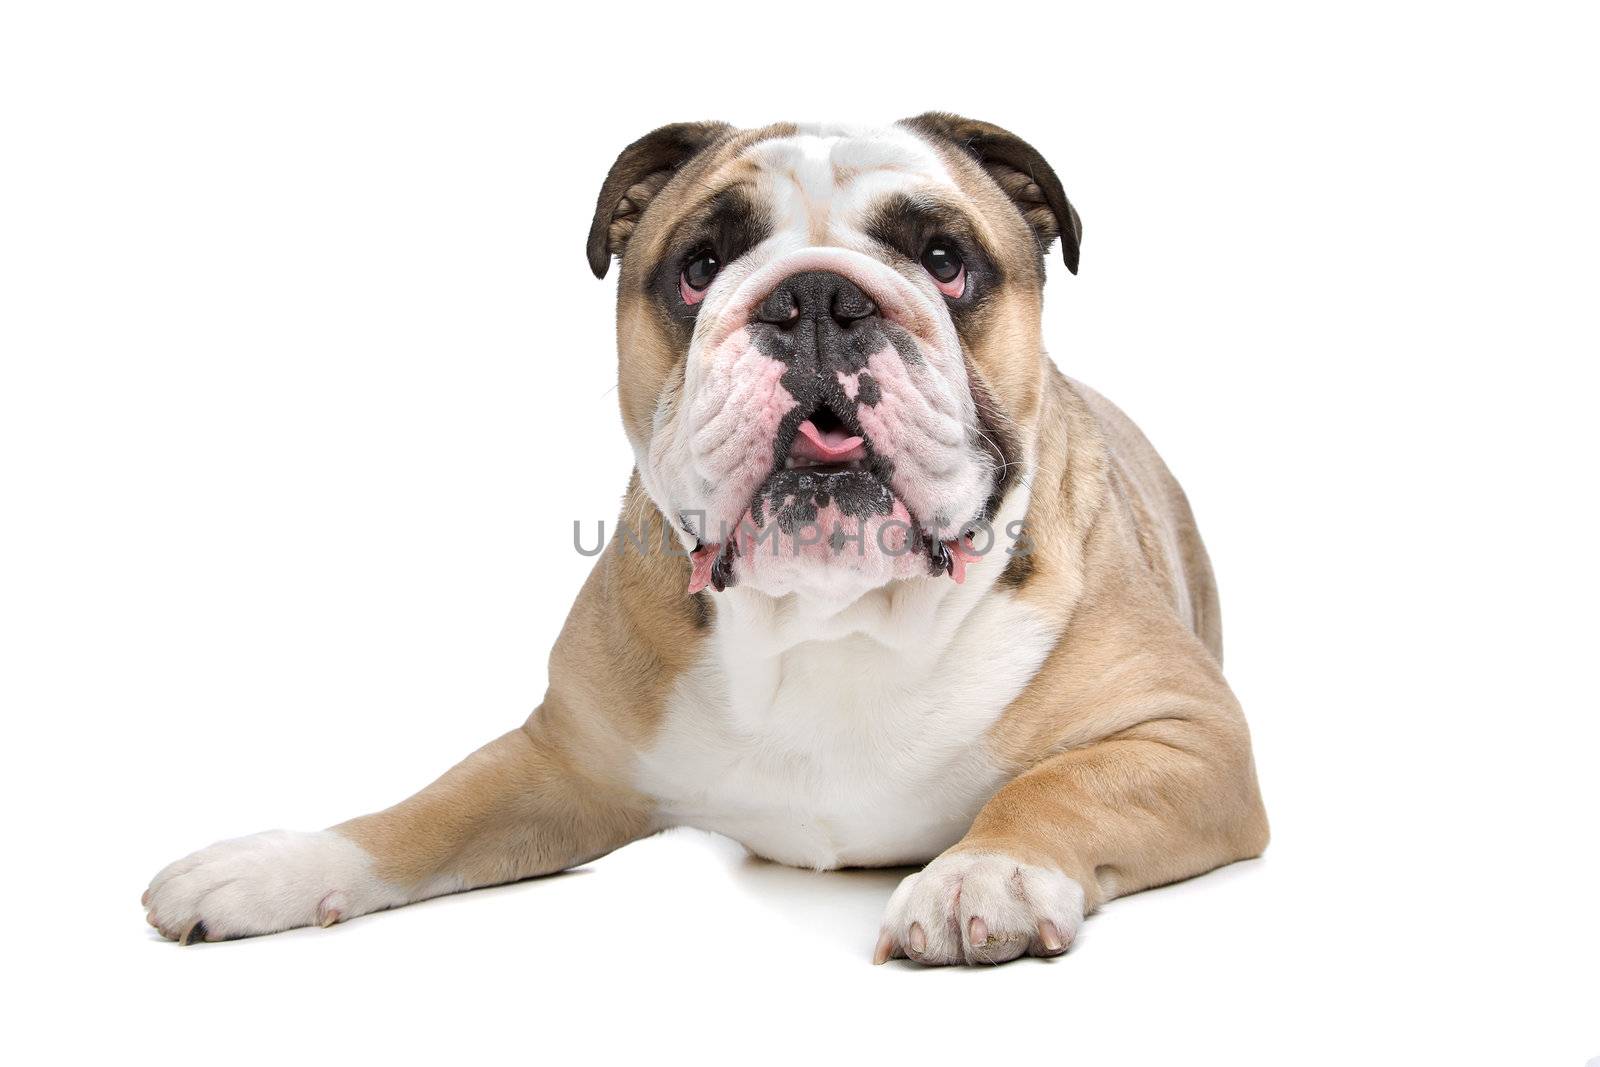 English Bulldog in front of a white background